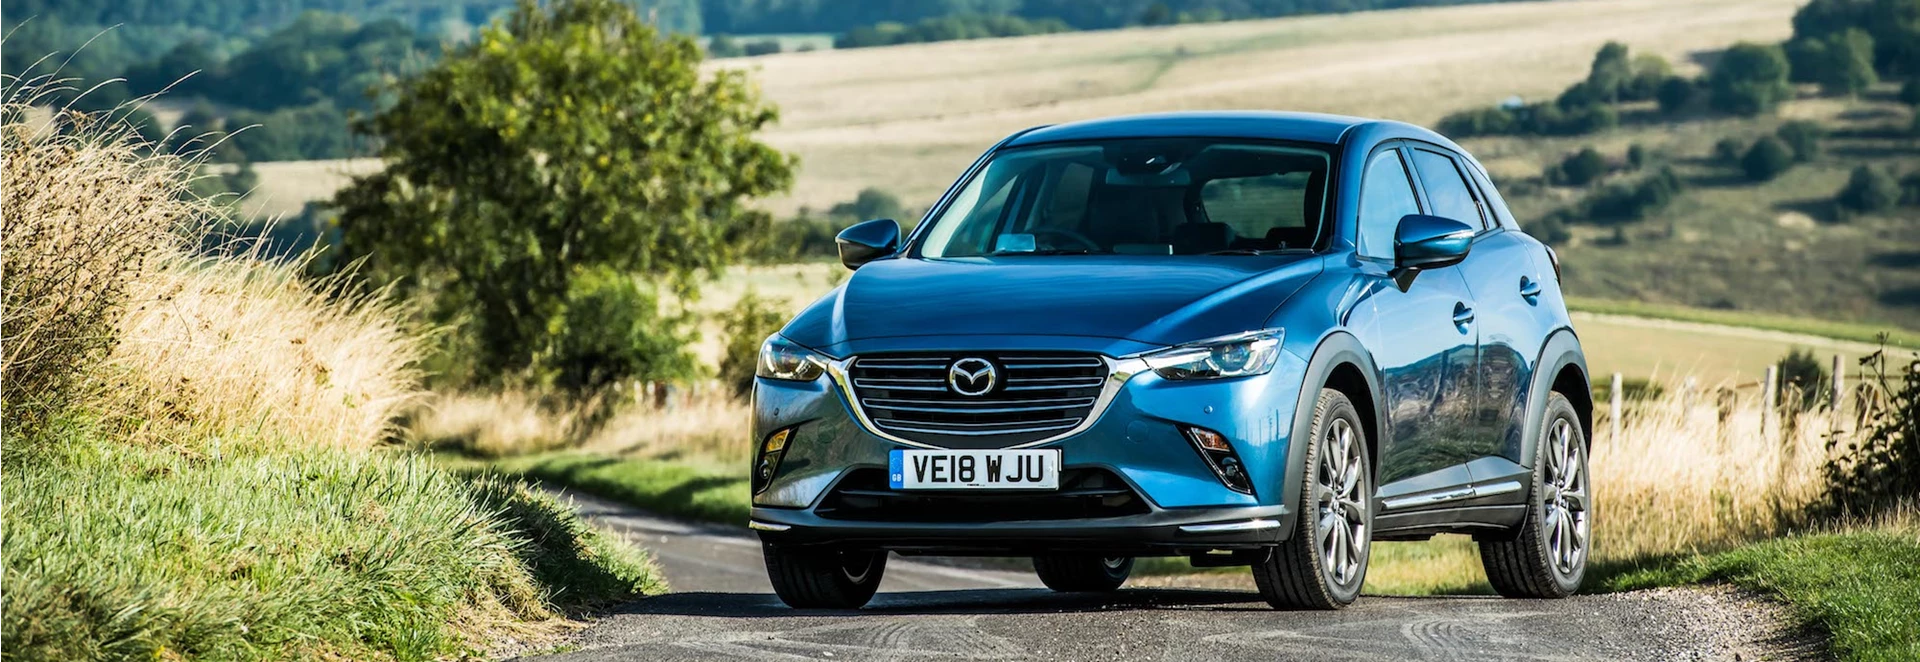 Mazda announces pricing for updated CX-3